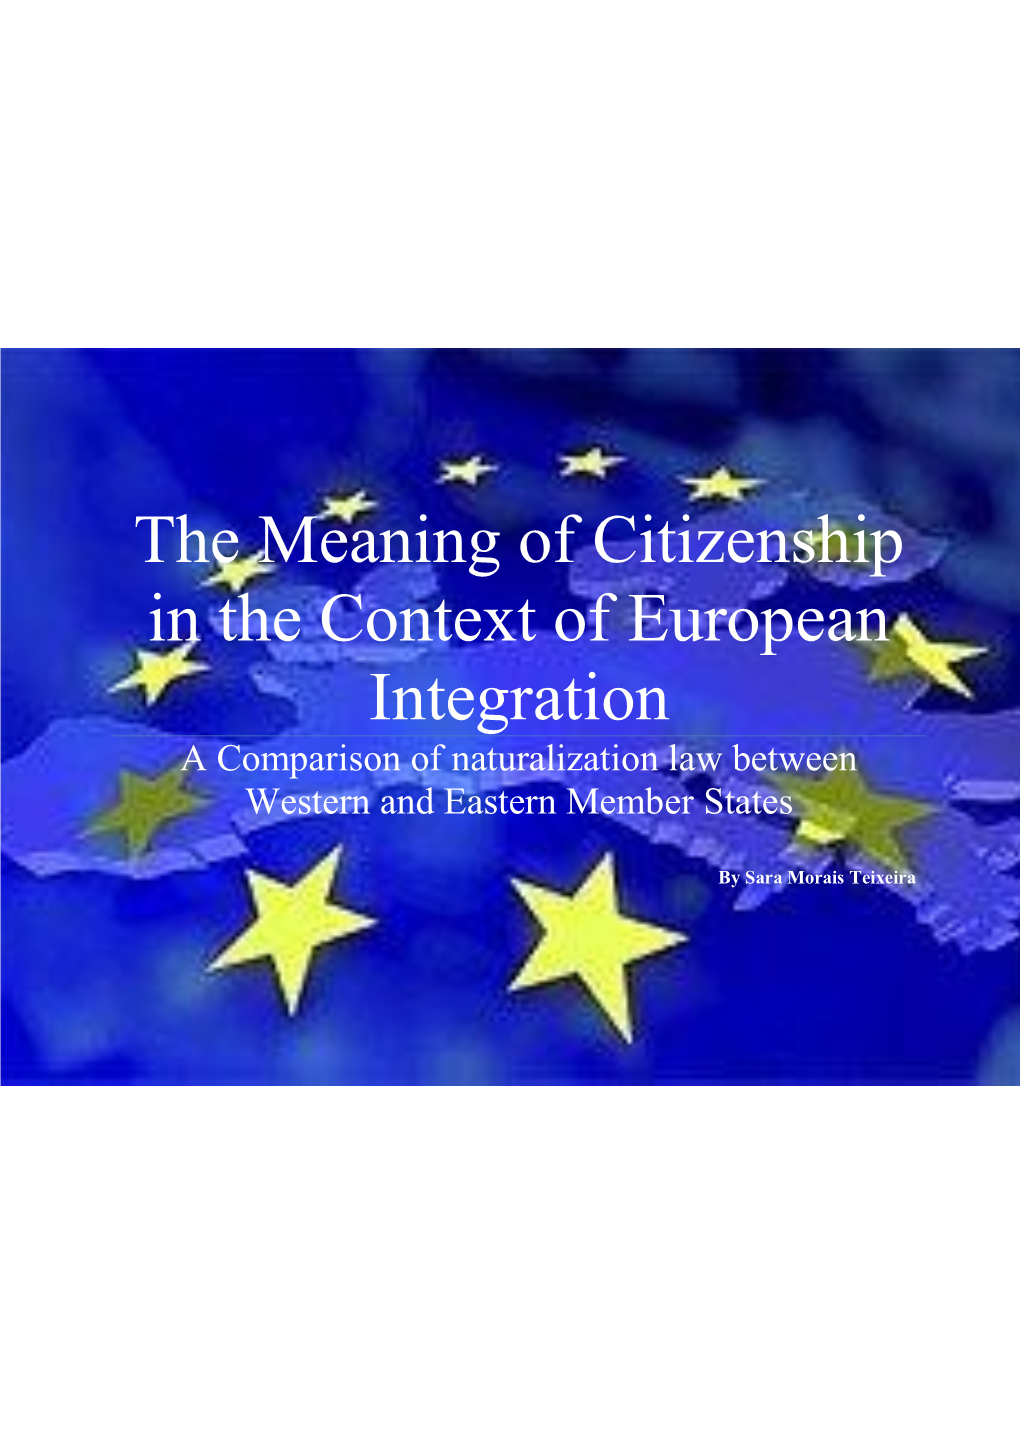 The Meaning of Citizenship in the Context of European Integration a Comparison of Naturalization Law Between Western and Eastern Member States